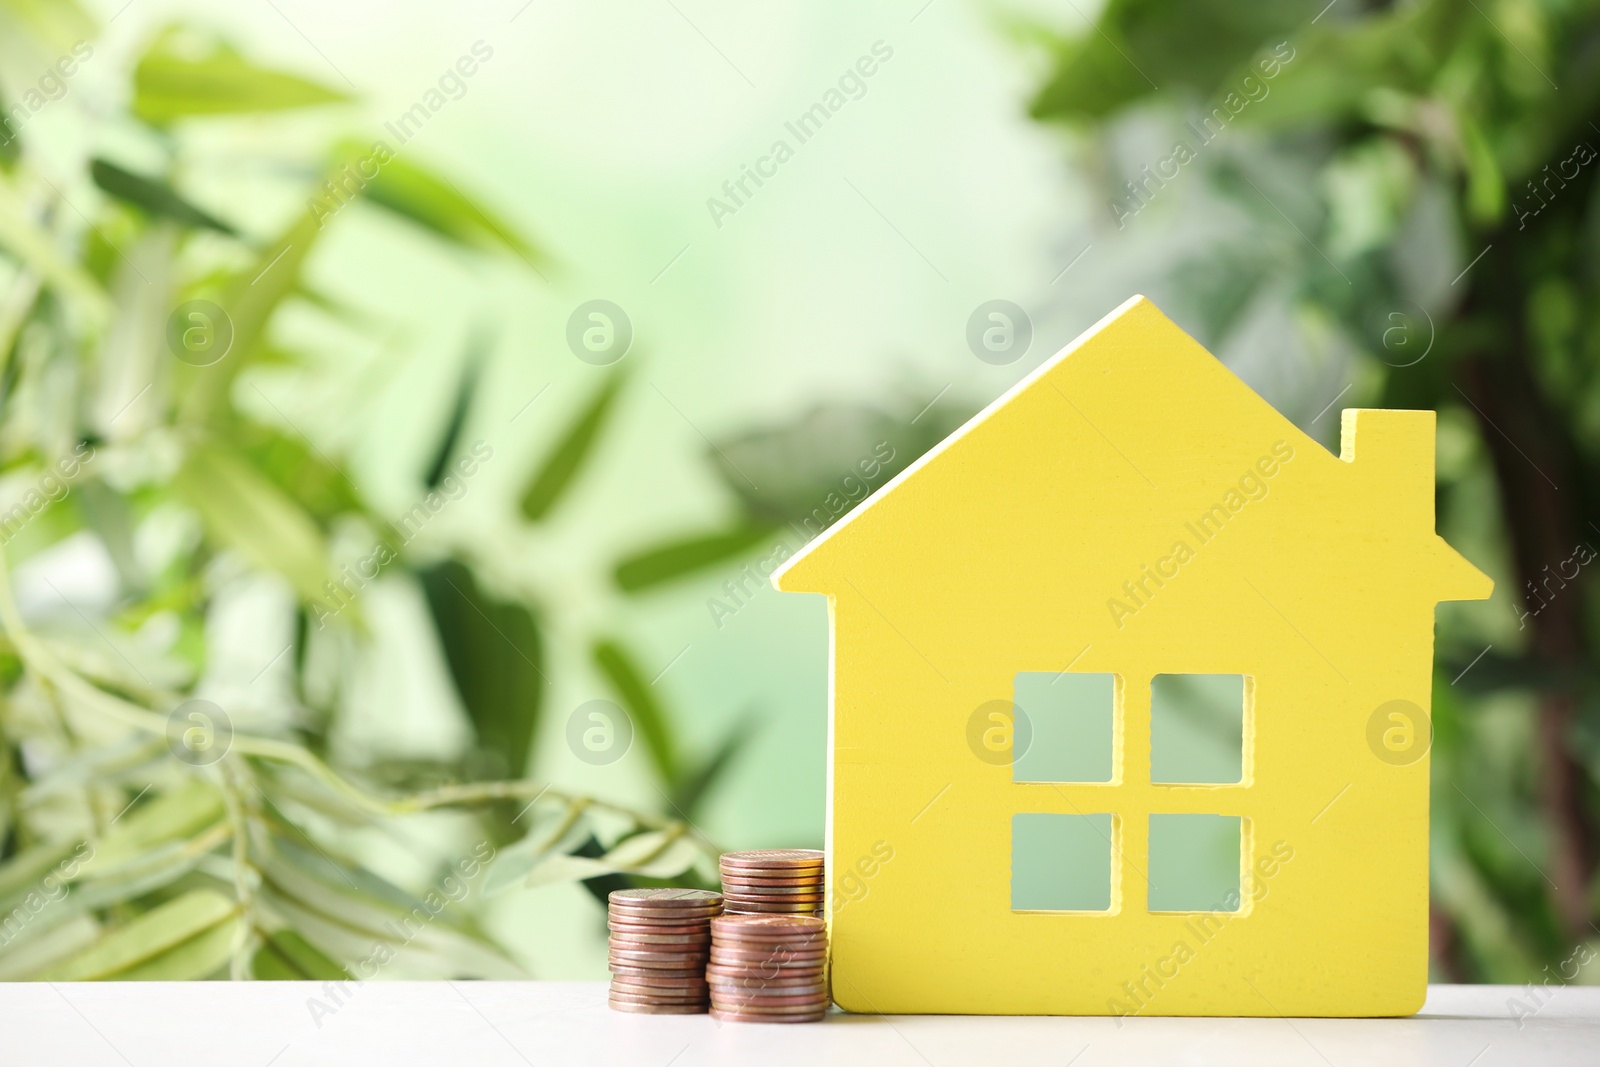 Photo of House figure and coins on table against blurred background. Space for text